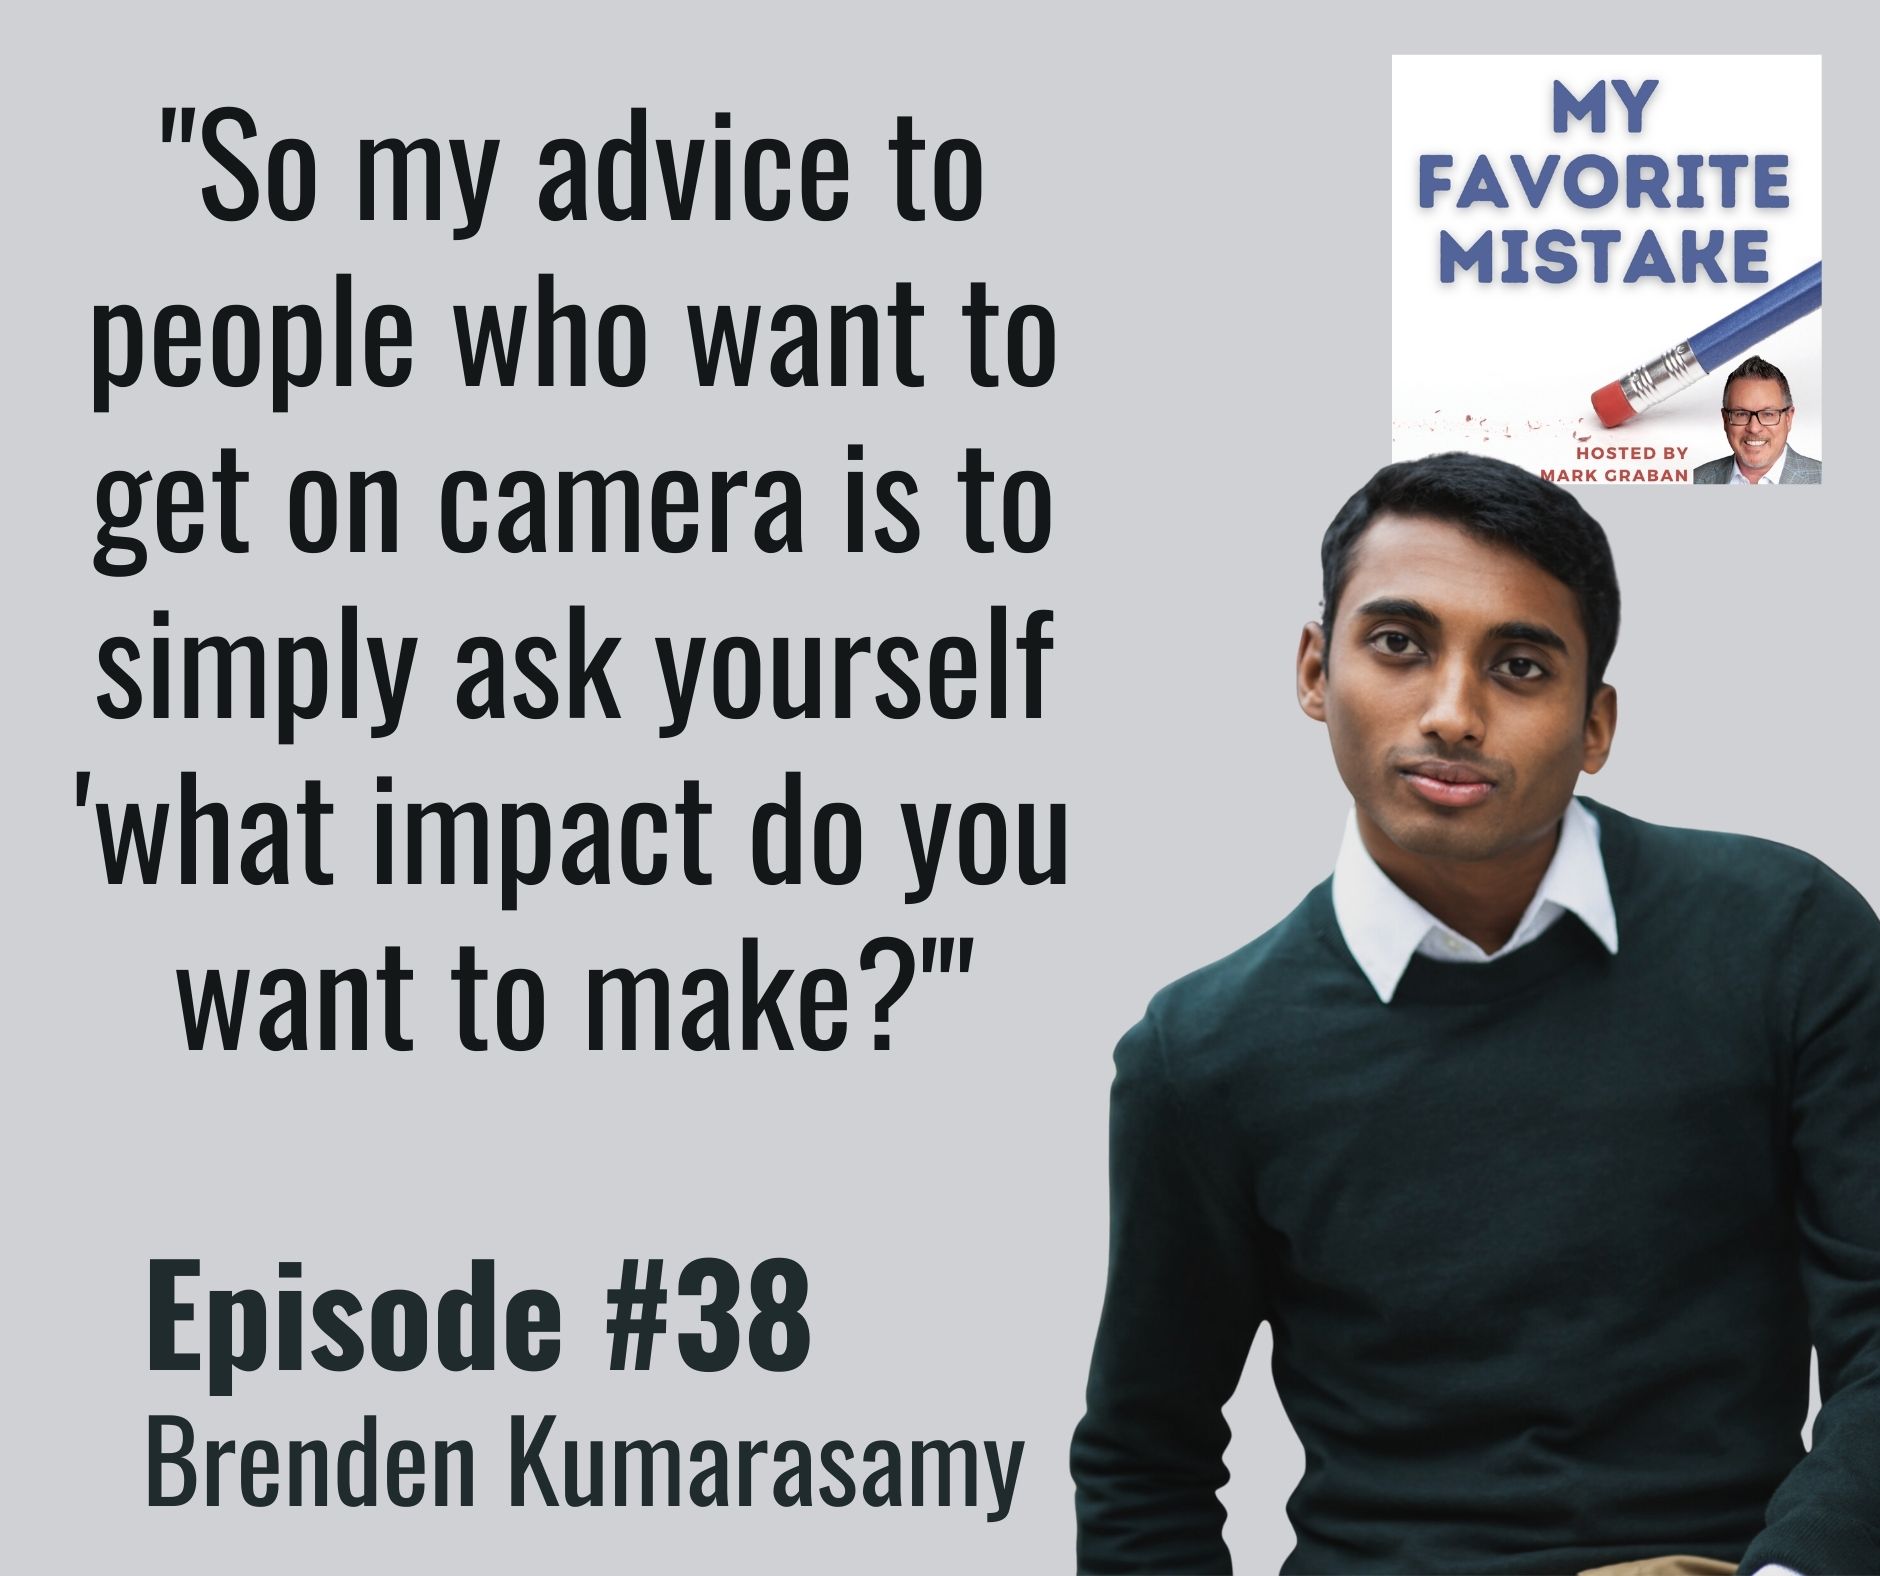 "So my advice to people who want to get on camera is to simply ask yourself 'what impact do you want to make?'"